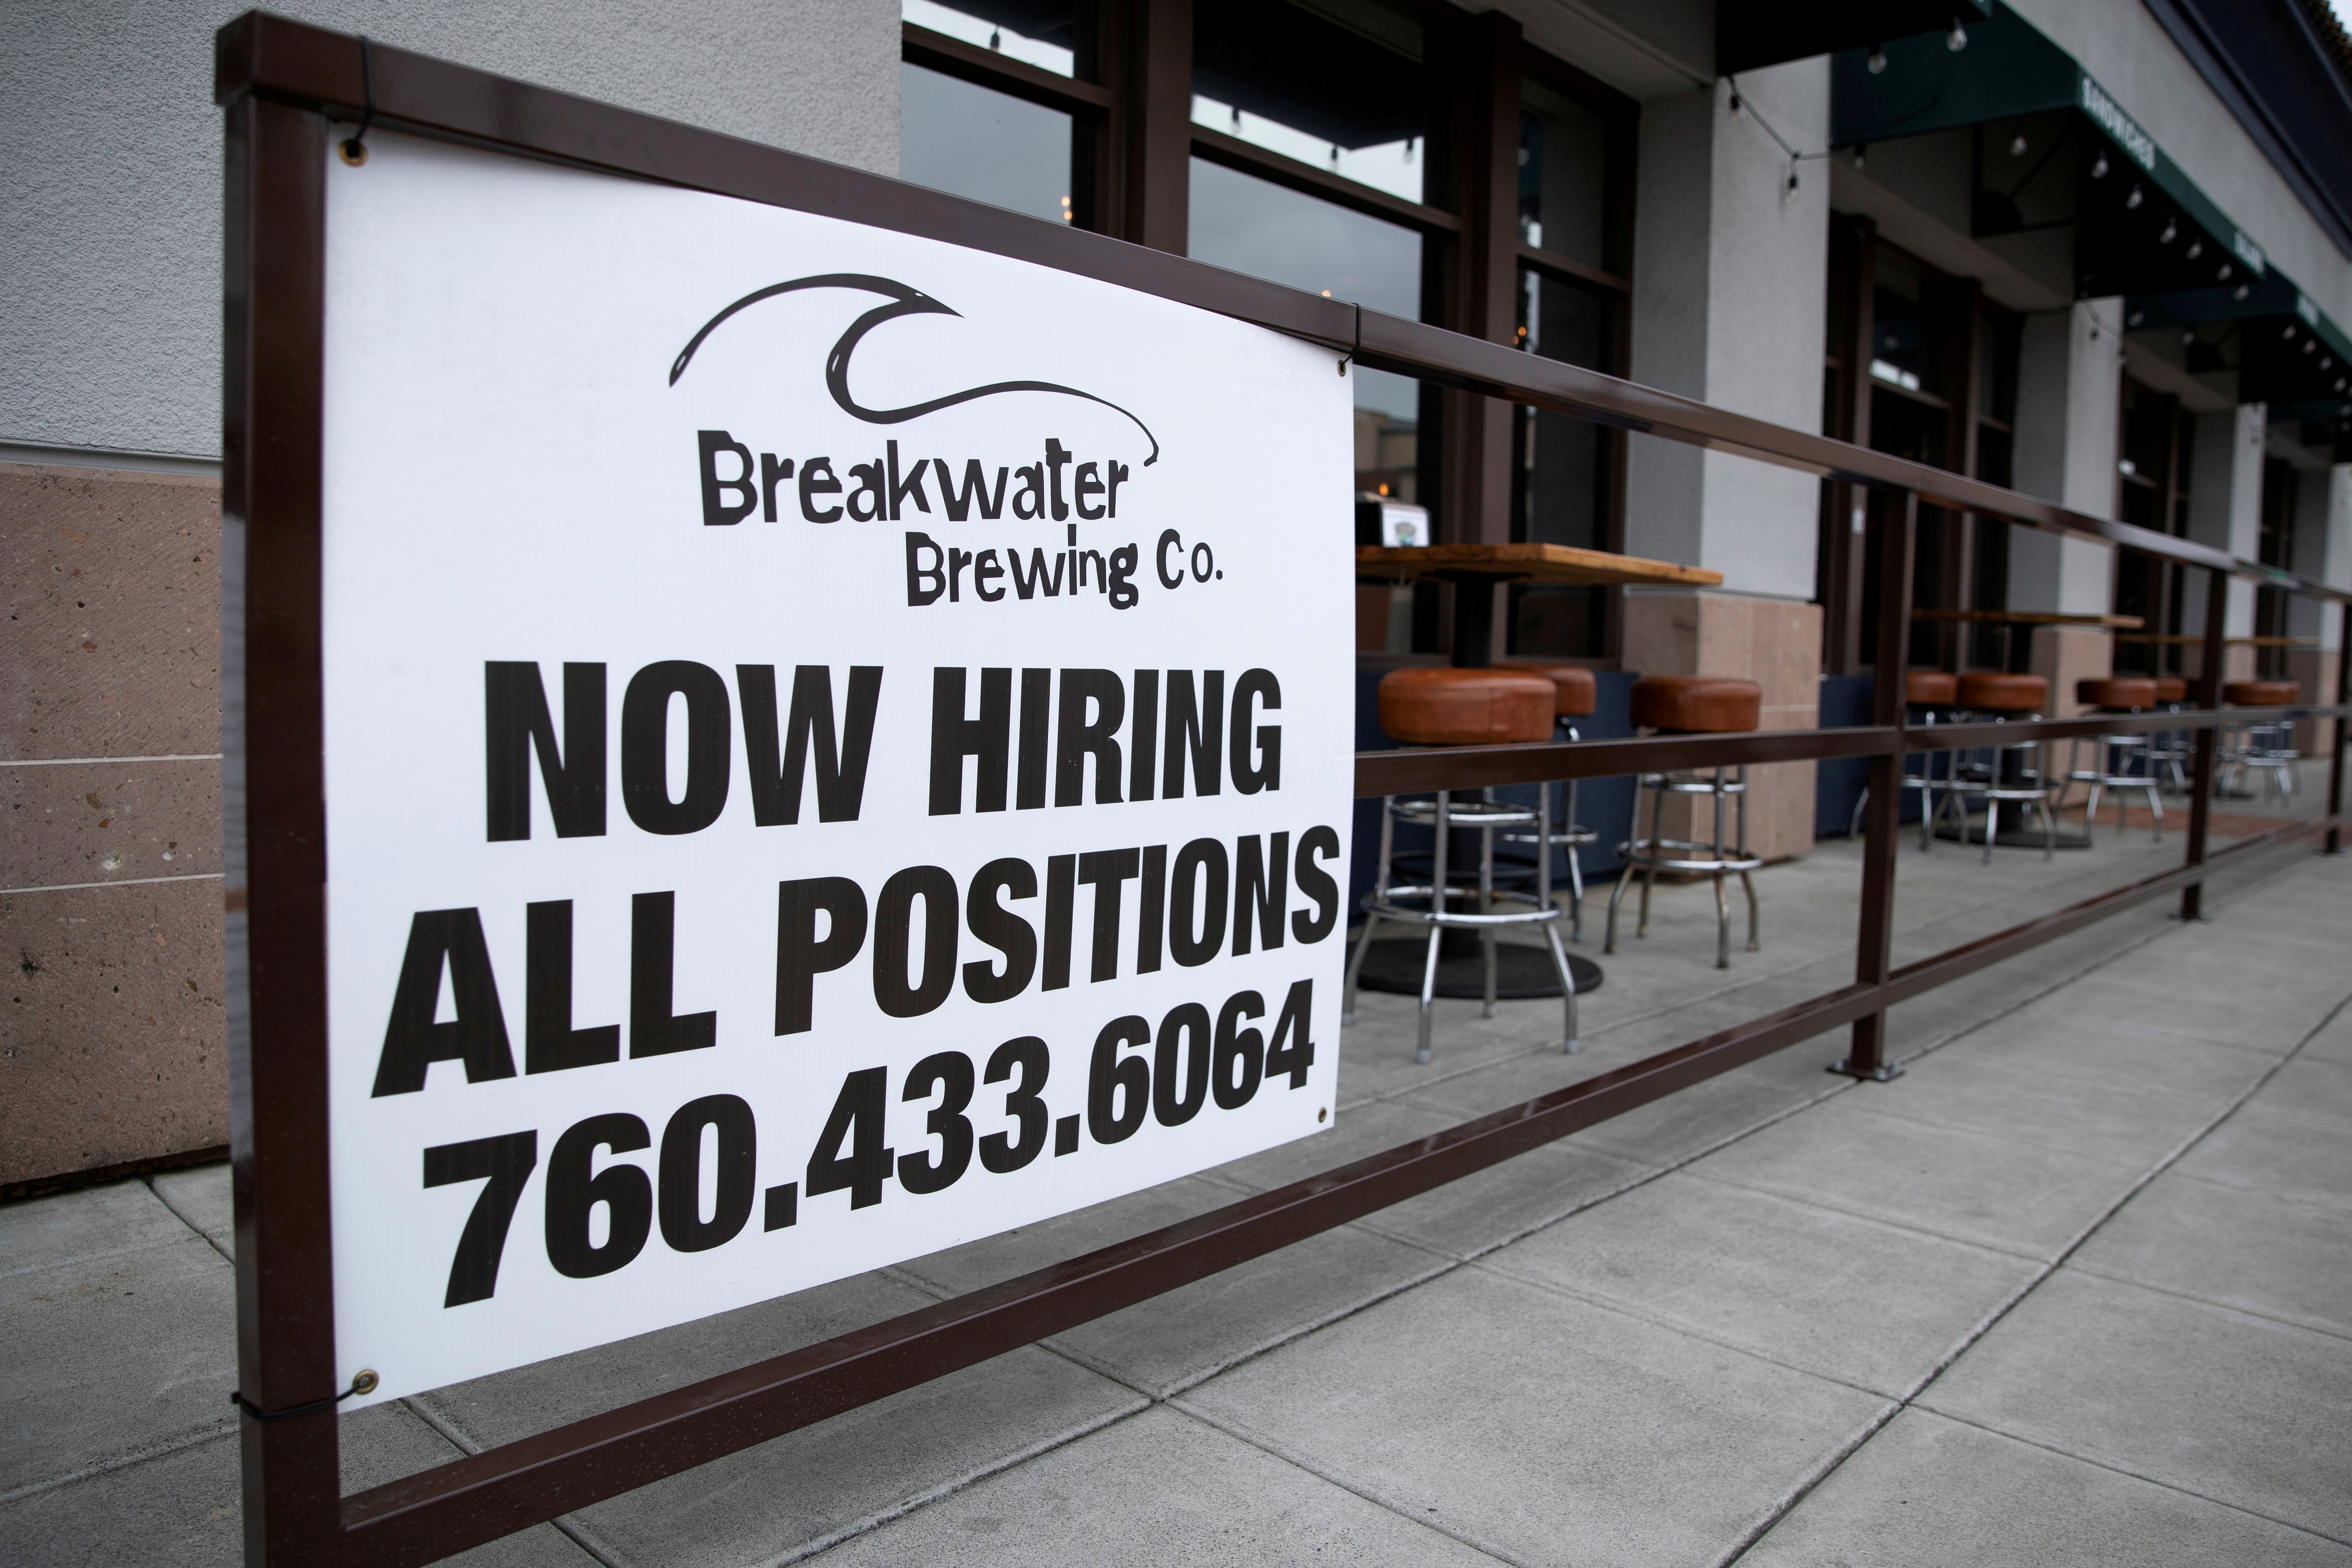 A restaurant advertising jobs looks to attract workers in Oceanside, California, U.S., May 10, 2021. REUTERS/Mike Blake/File Photo